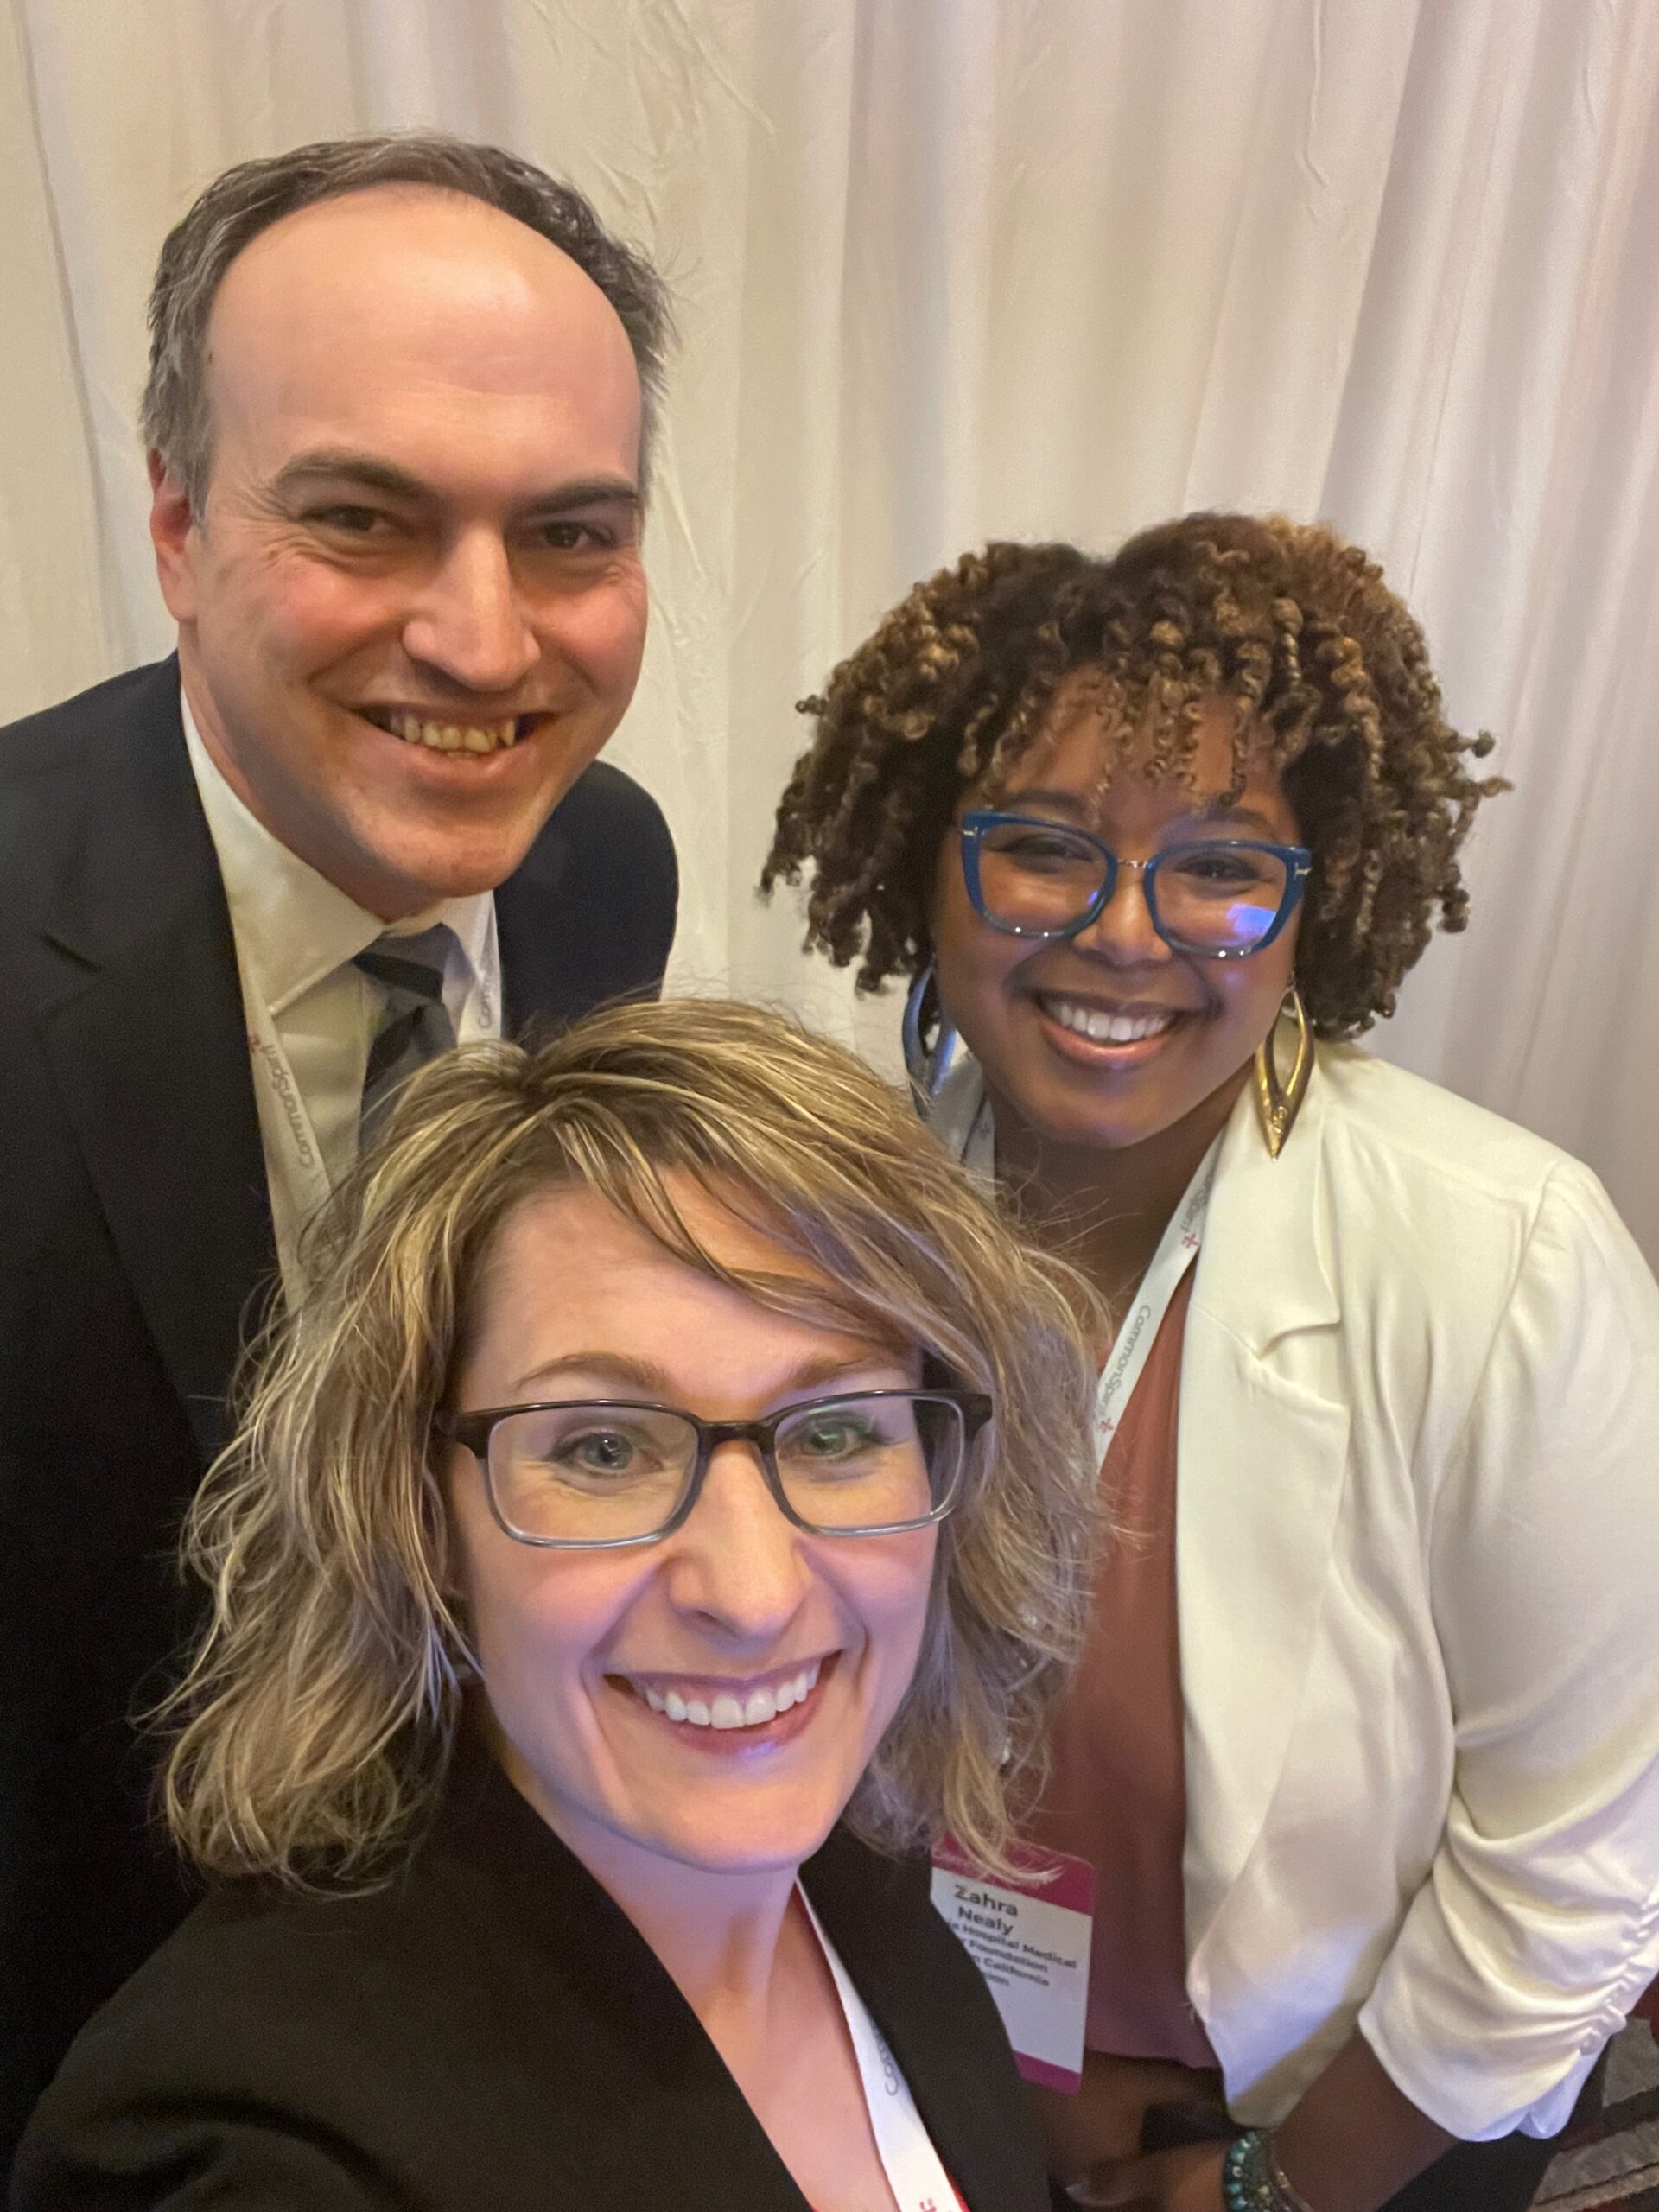 Alex Kwak, Zahra Nealy and Beth Hatcher after their presentation, “Best Practices for Email Marketing and Communications”, at the CommonSpirit Health Philanthropy Education Summit in Las Vegas